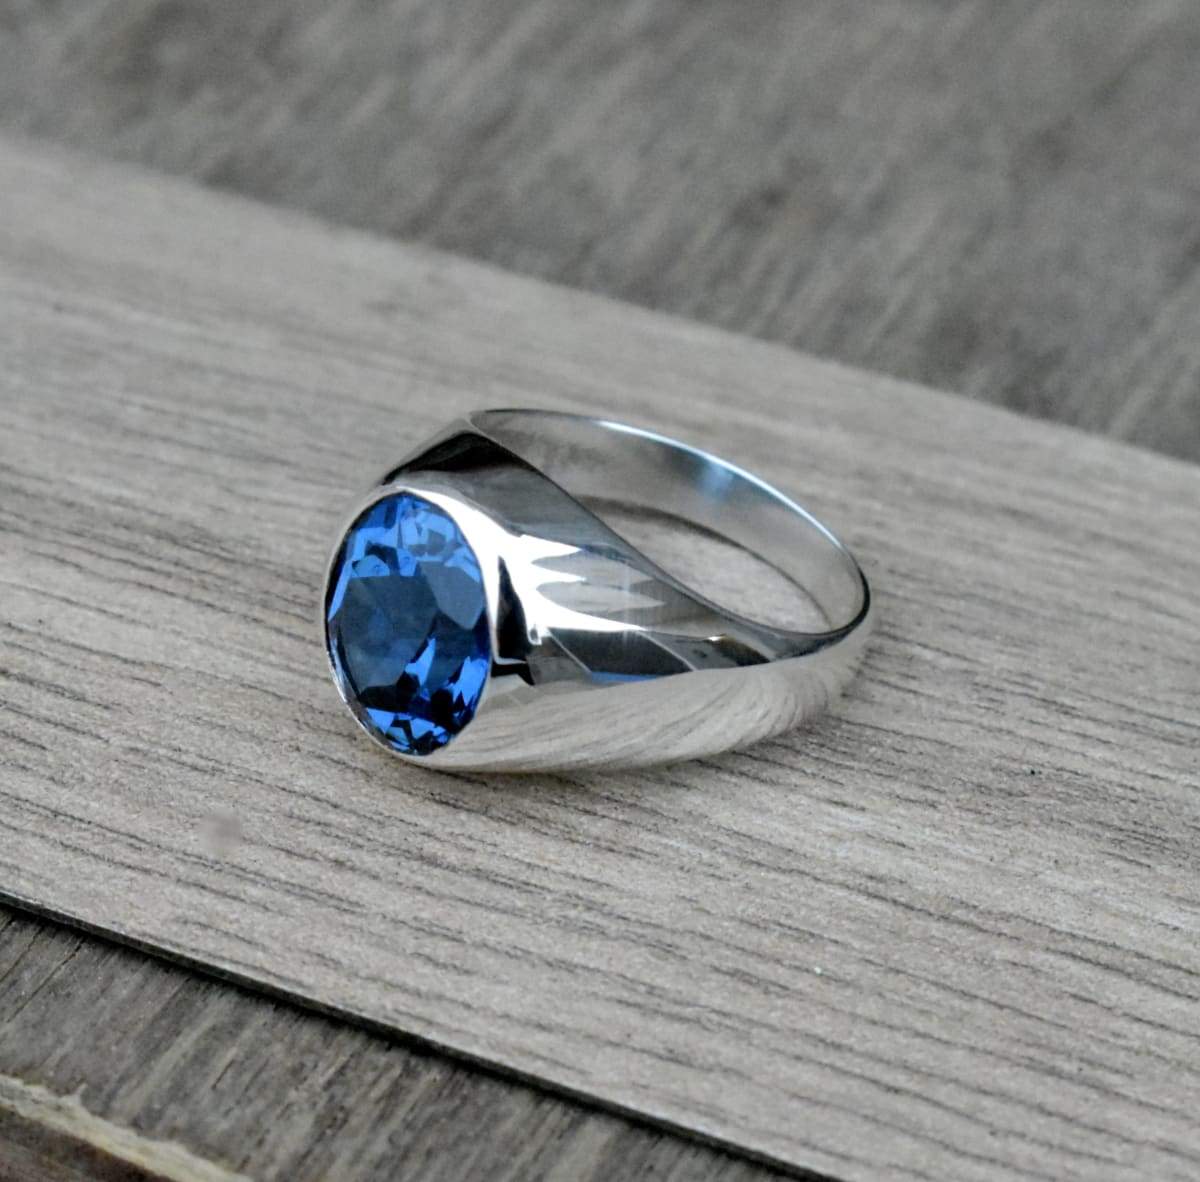 100% Natural London Blue Topaz Ring 2ct VVS Grade Topaz Silver Ring Classic  925 Silver Gemstone Jewelry Gift for Woman